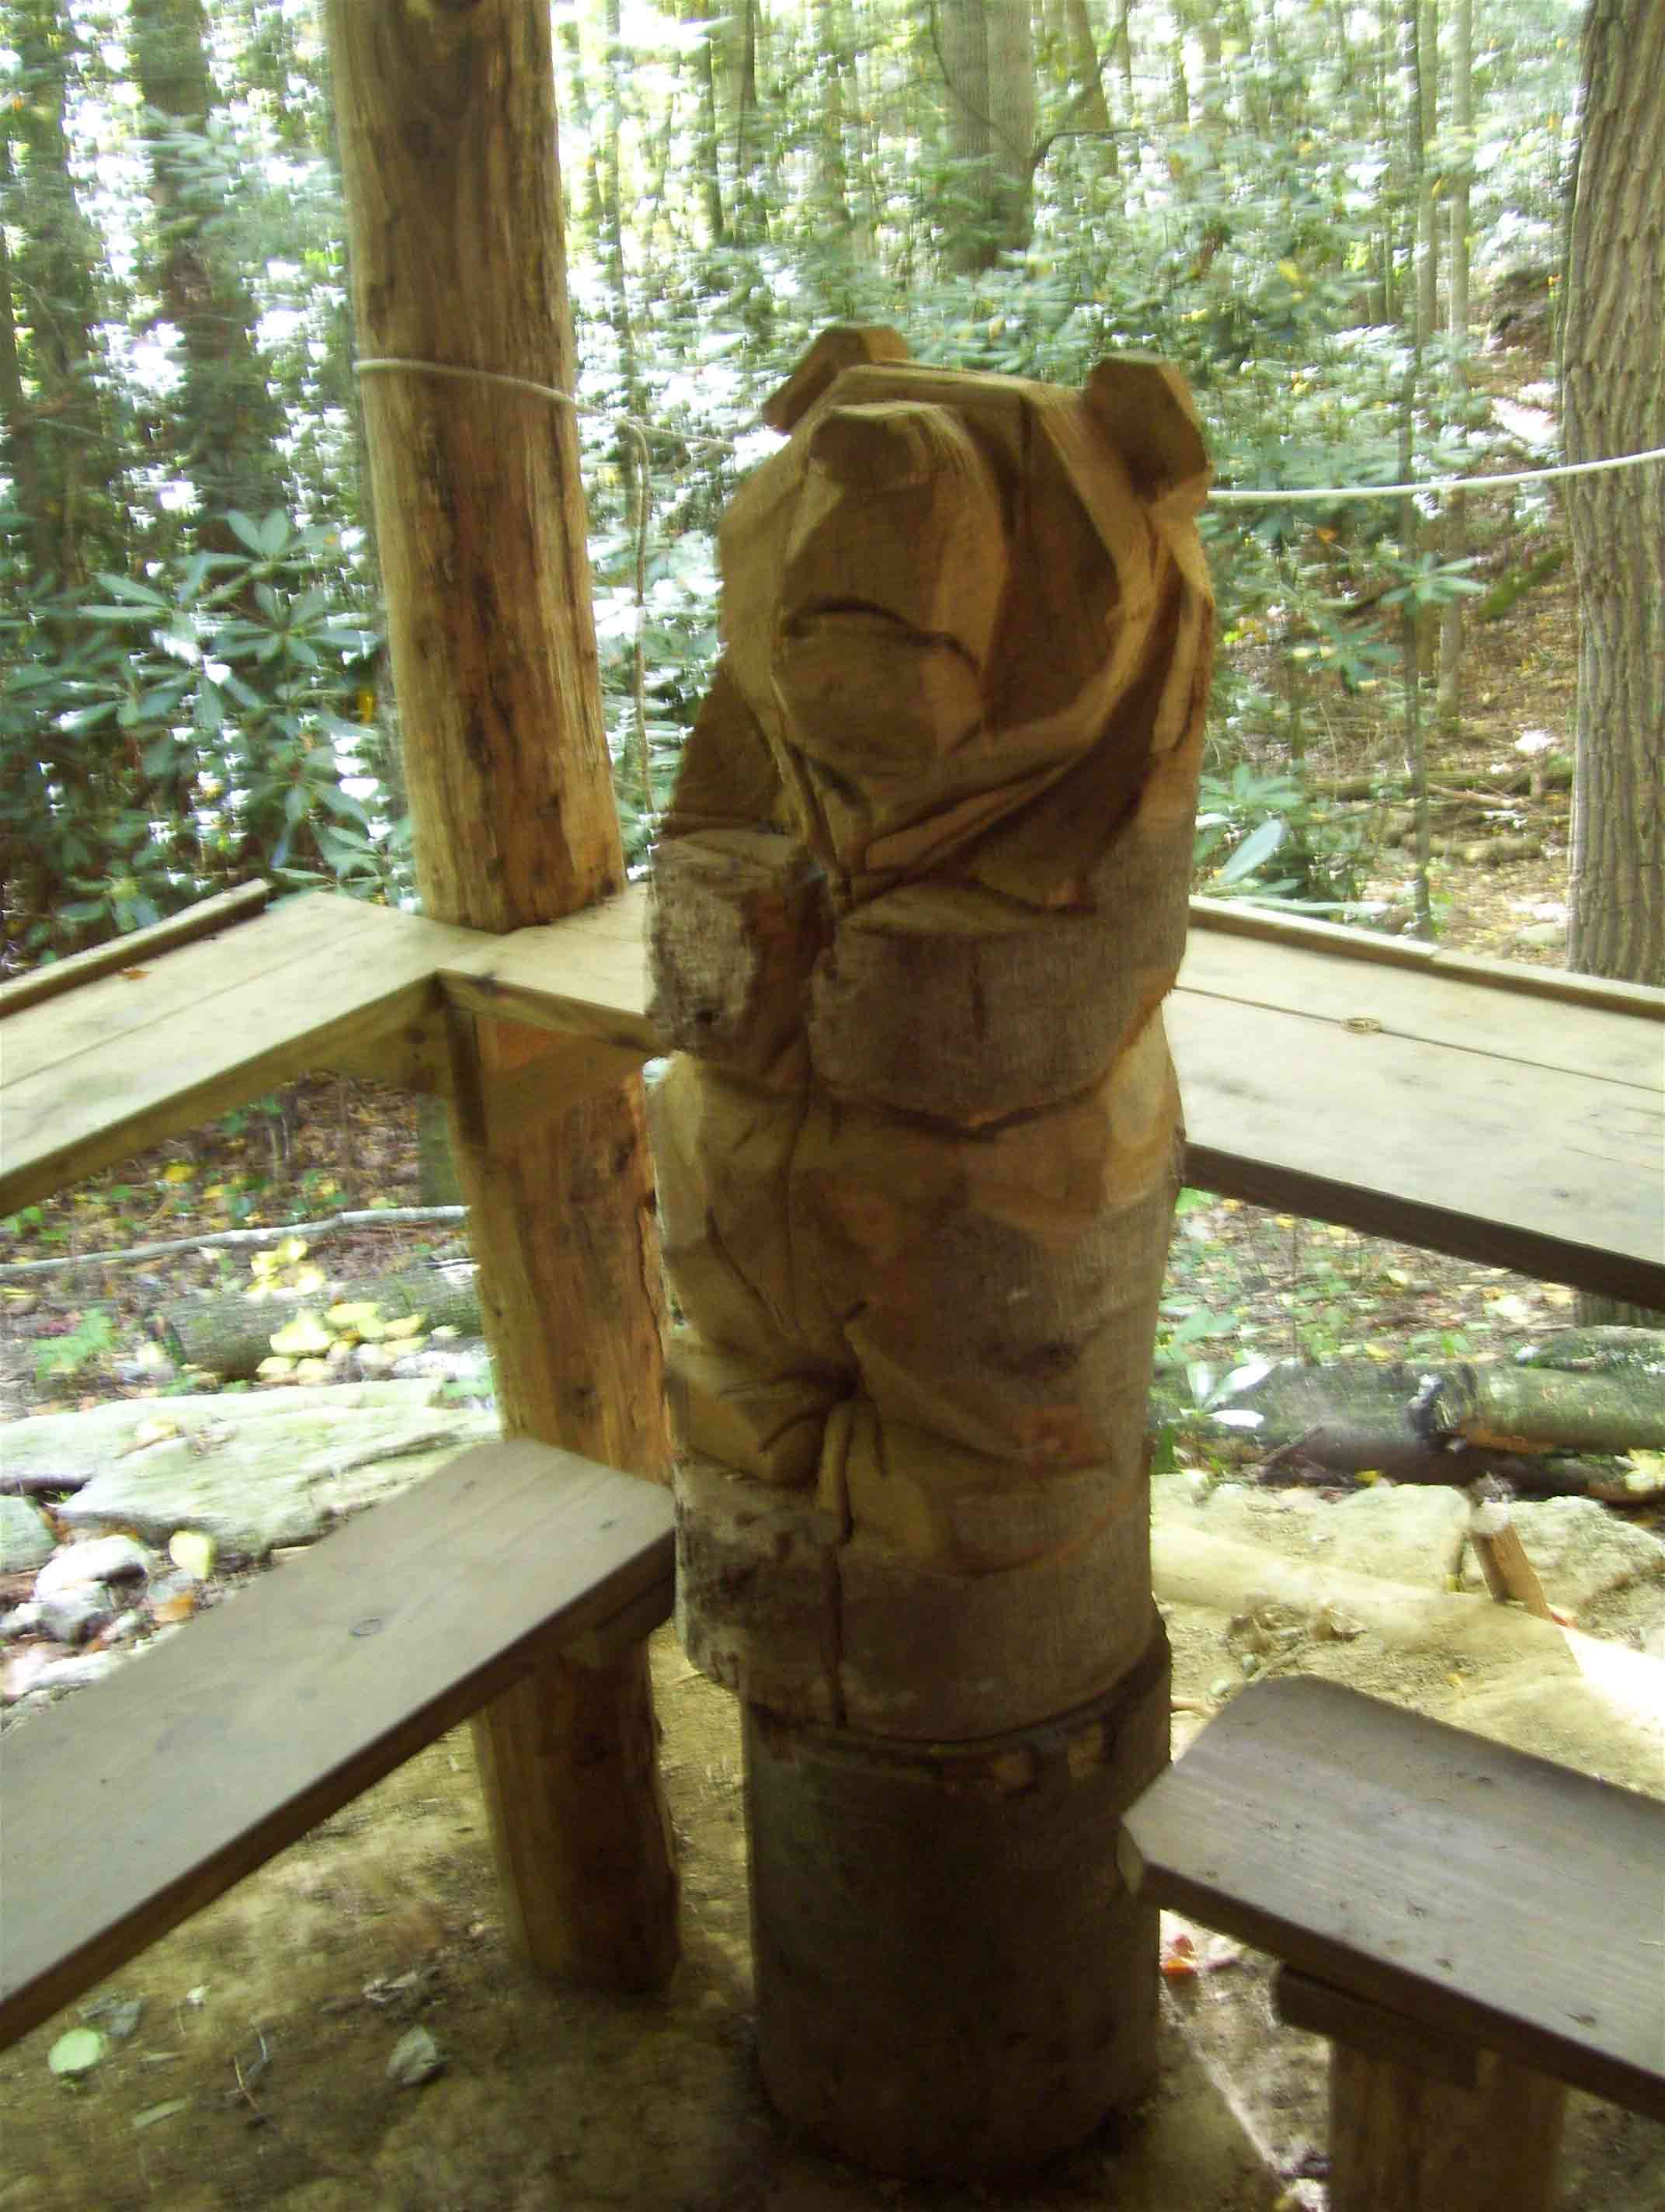 mm 15.6  Carved bear statue at Mountaineer Falls Shelter (2008).  Courtesy dlcul@conncoll.edu